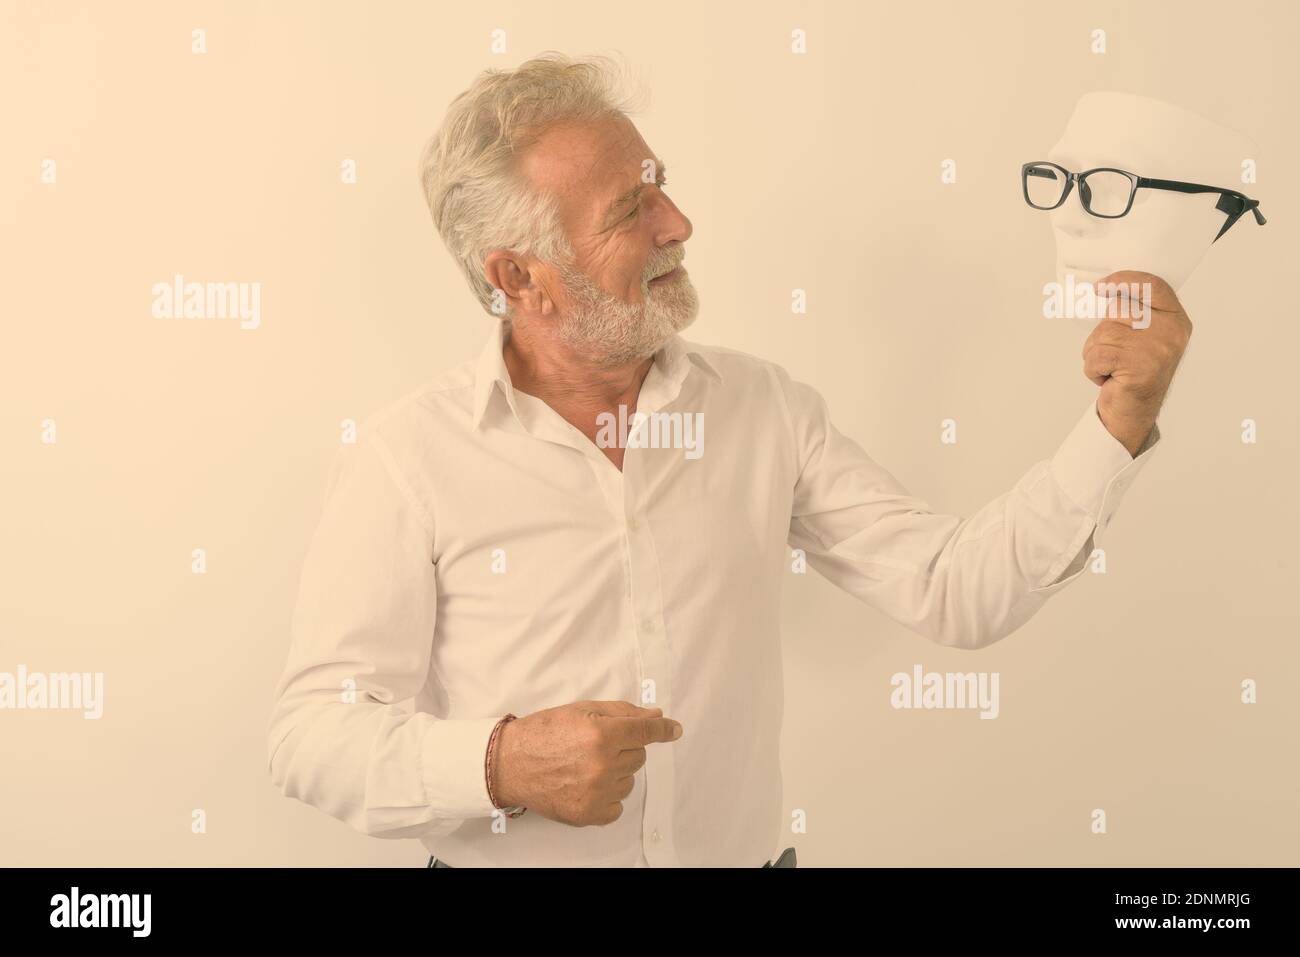 Profile view of happy senior bearded man smiling and looking at white mask with eyeglasses against white background Stock Photo